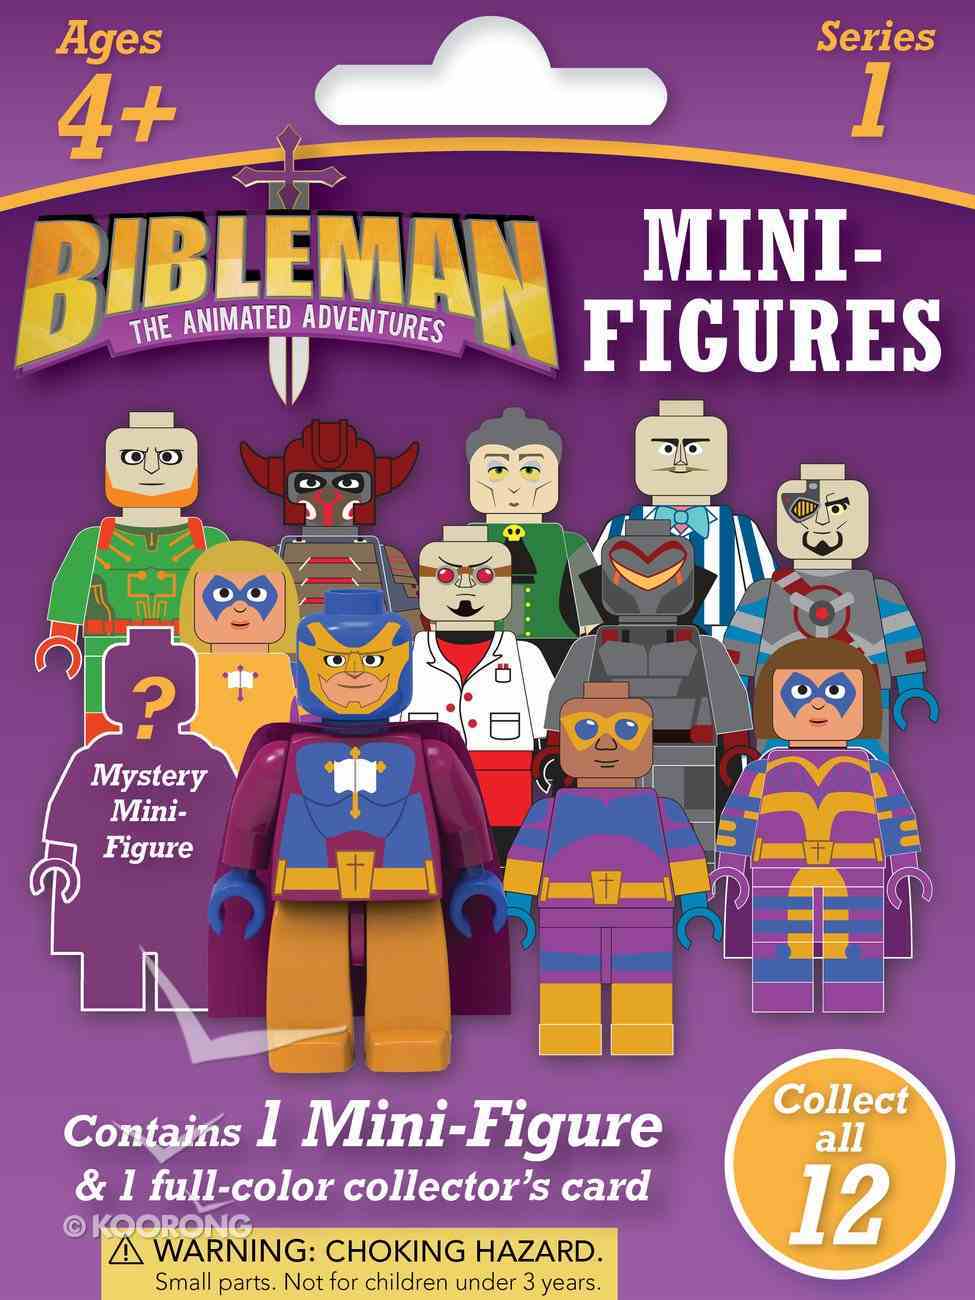 Bibleman Mini Figure , Ages 4+ (Contains 1 Mini-figure & 1 Four-color Trading Card From Series 1) Soft Goods